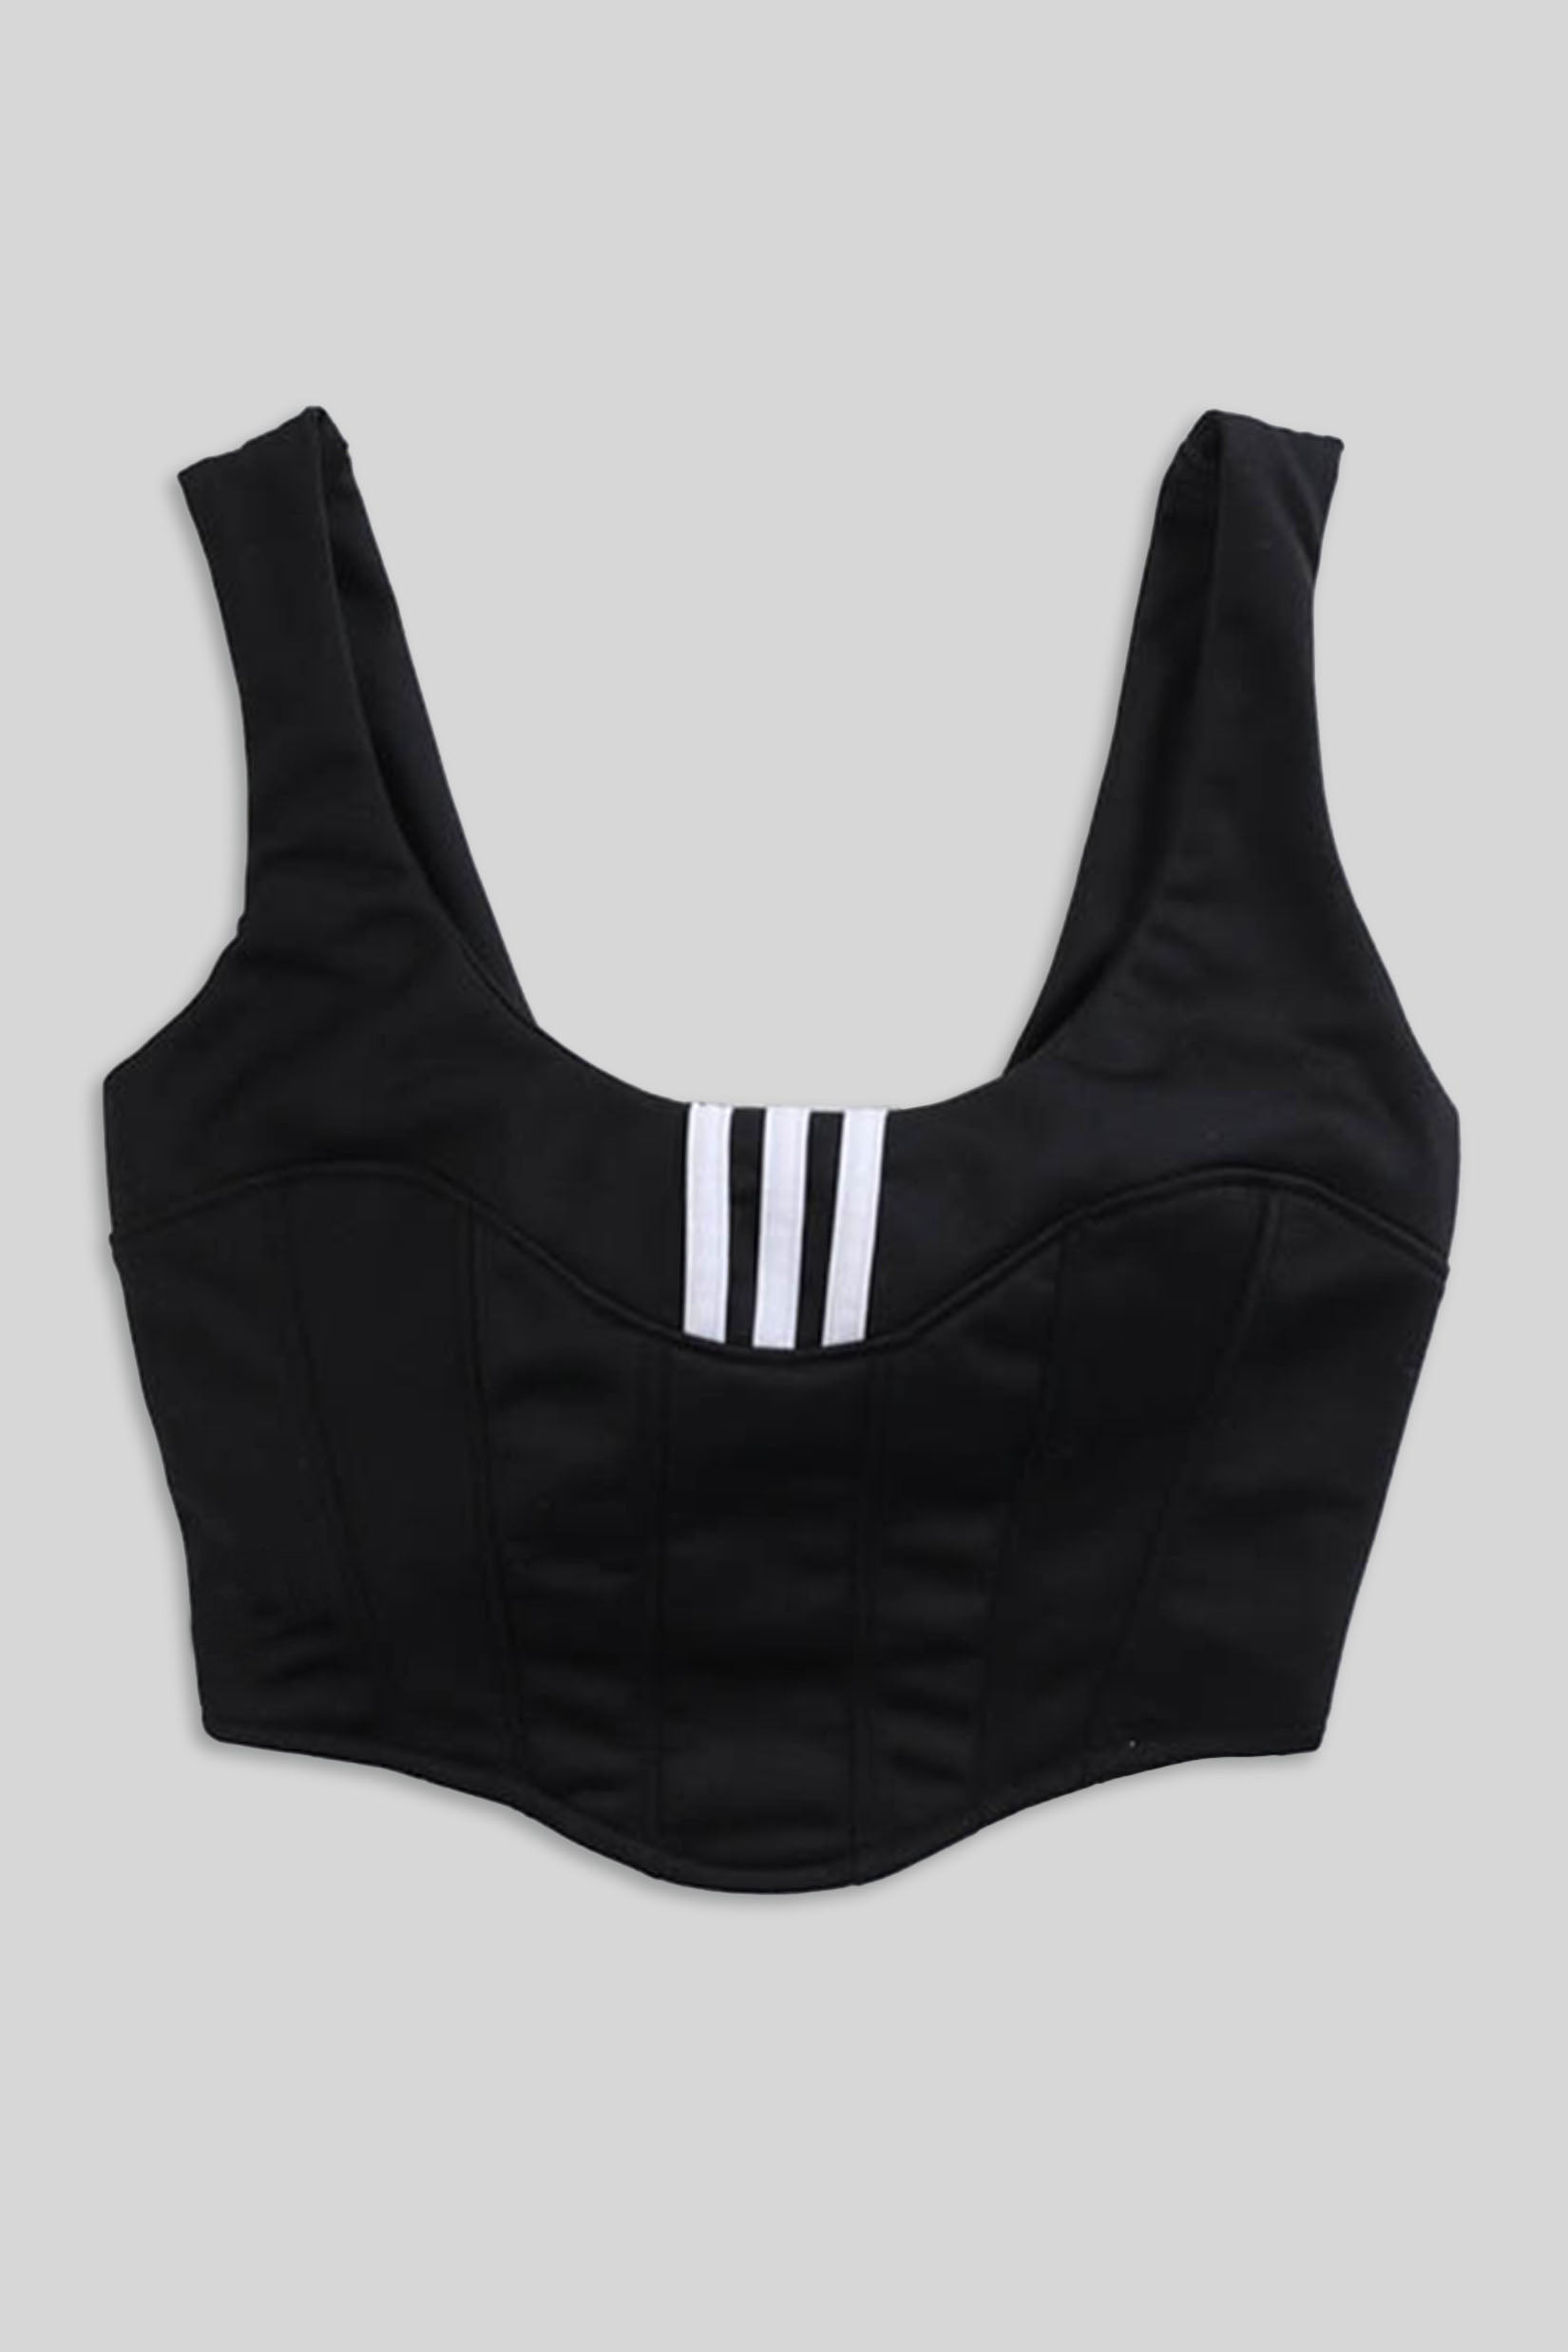 Rework Adidas Athletic Triangle Top - XS, S, M, L – Frankie Collective